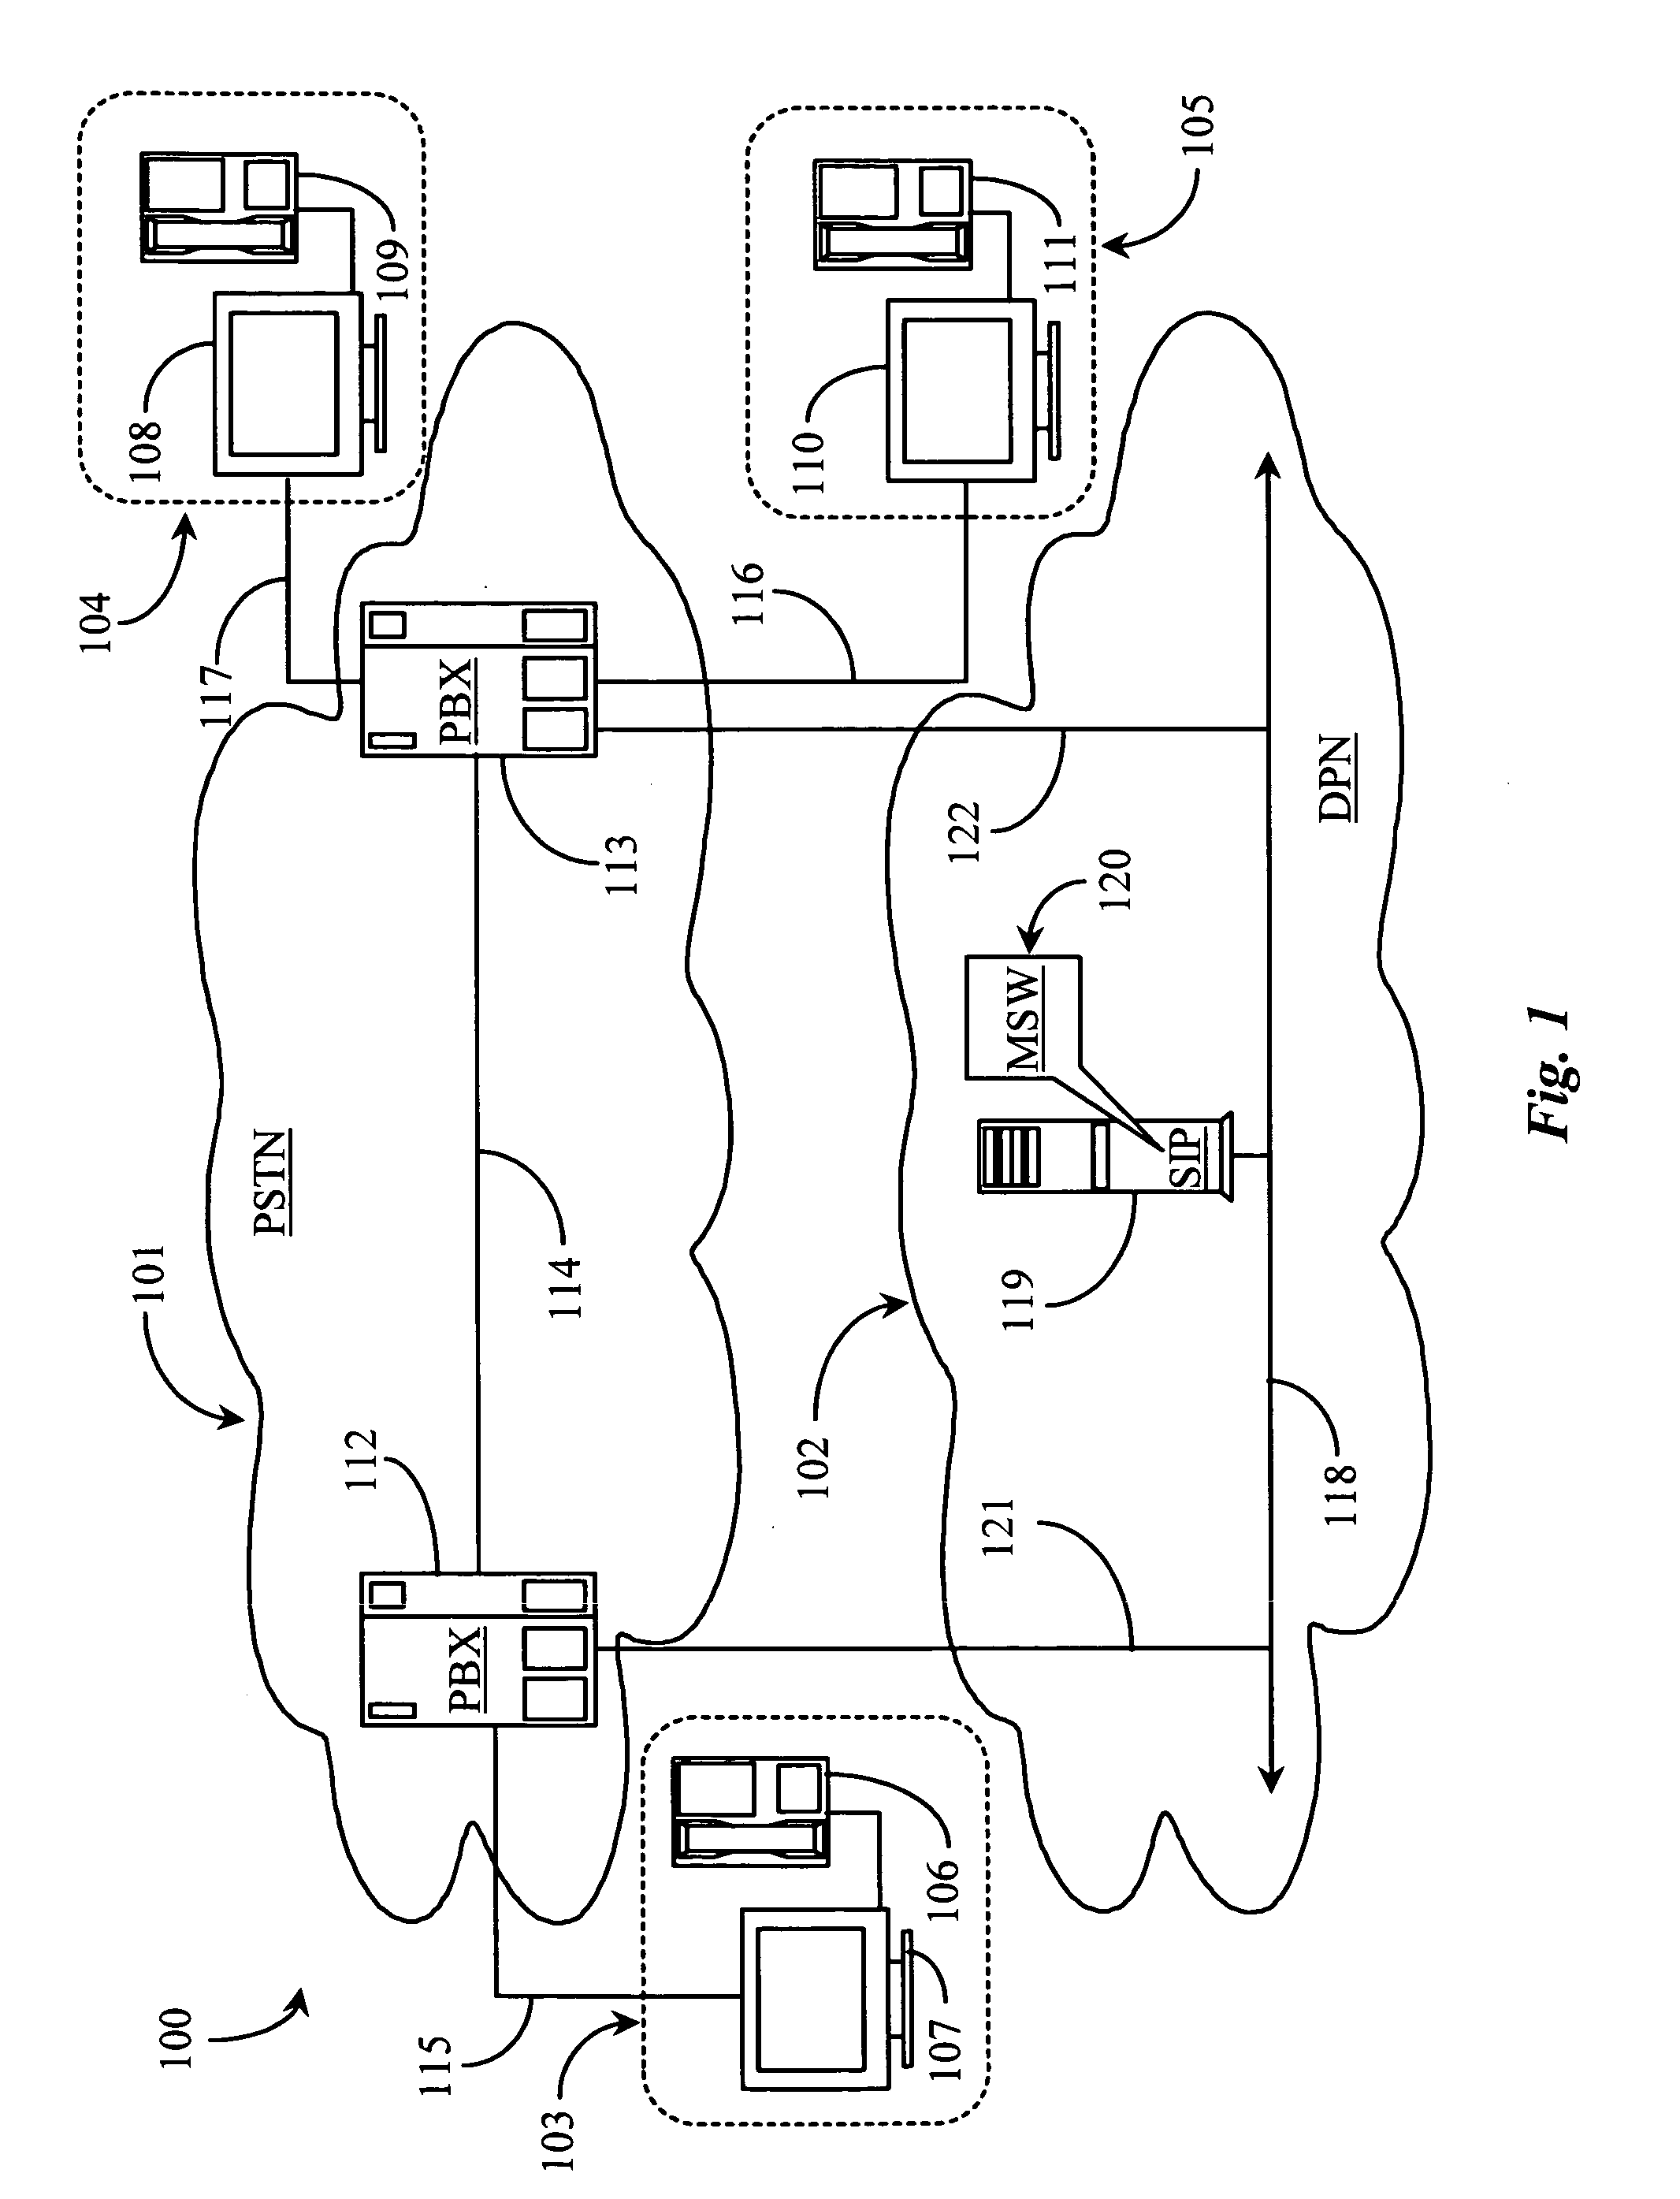 Methods and apparatus for accomplishing call-state synchronization and event notification between multiple private branch exchanges involved in a multiparty call